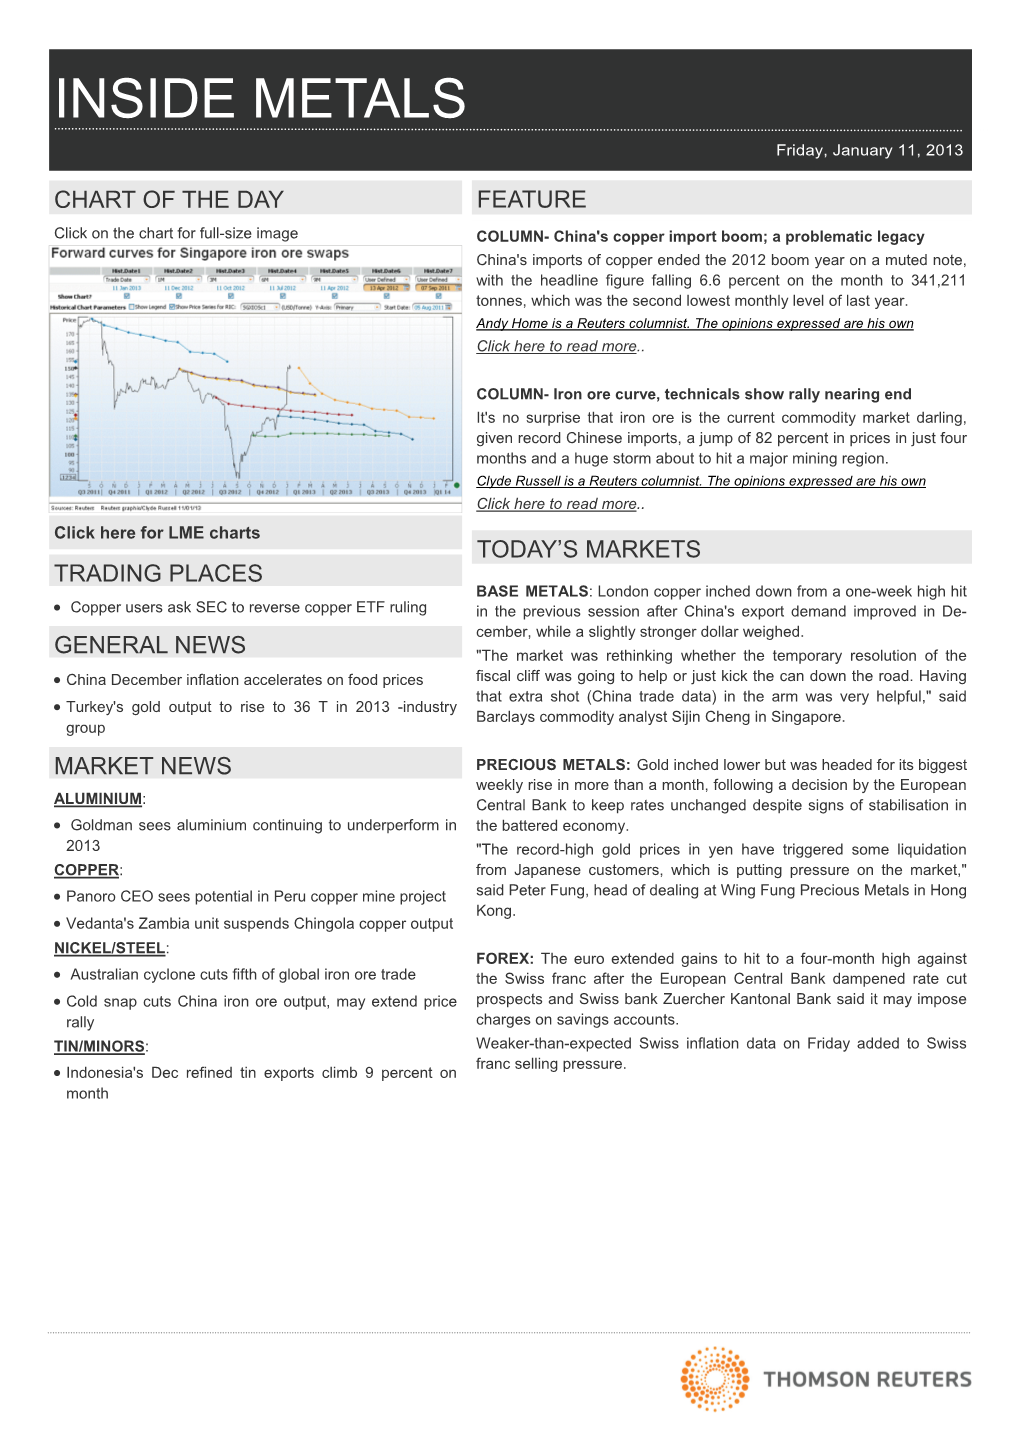 INSIDE METALS Friday, January 11, 2013